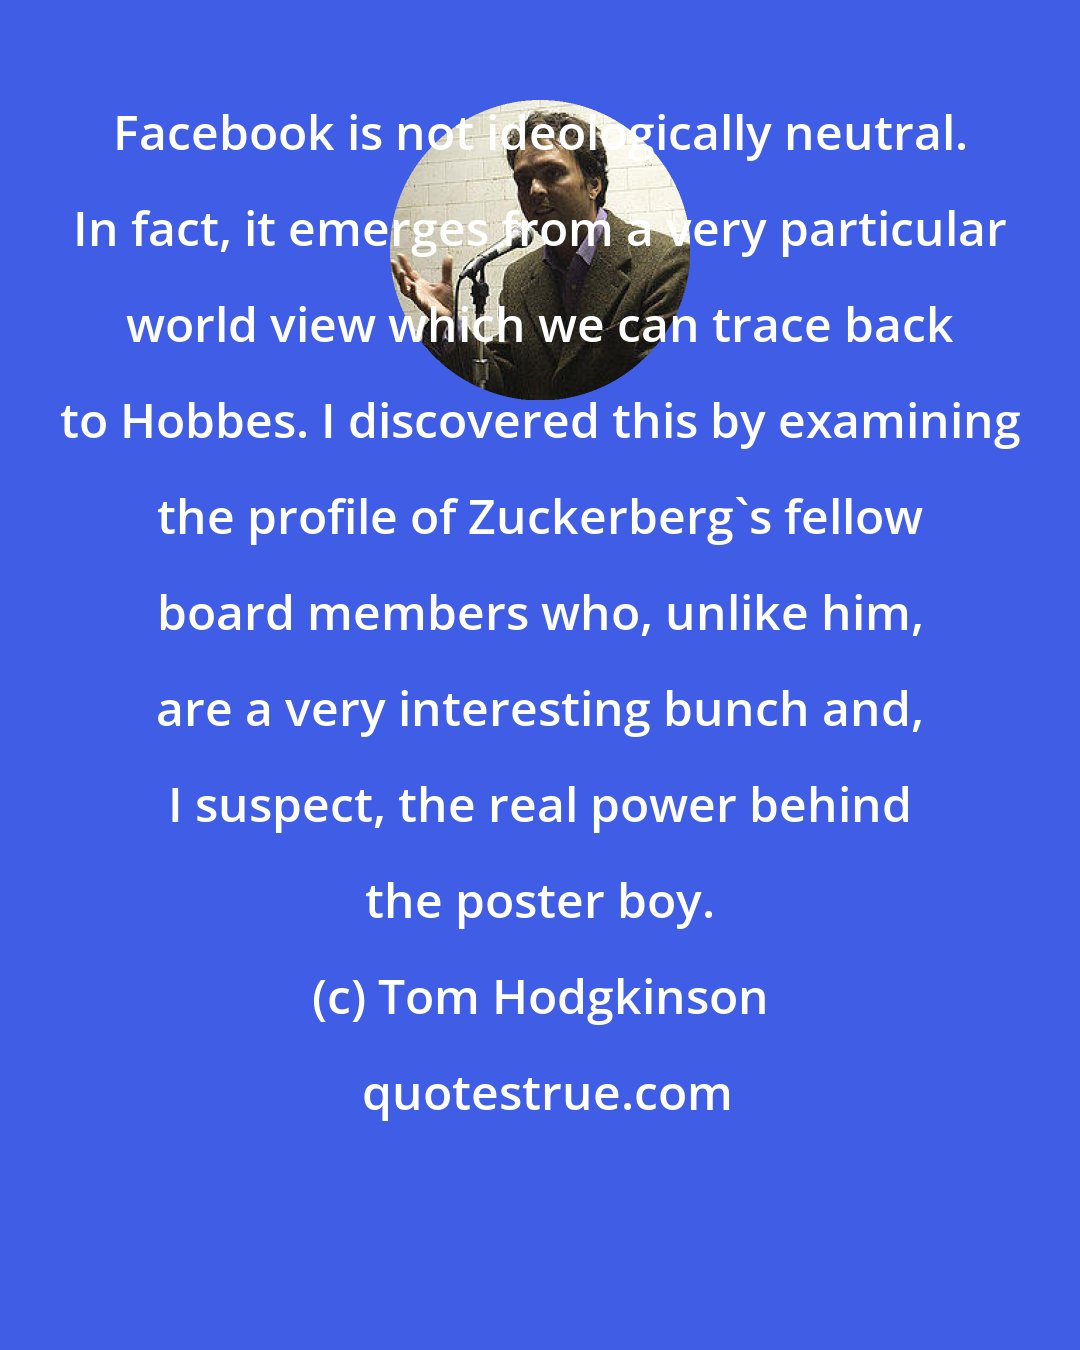 Tom Hodgkinson: Facebook is not ideologically neutral. In fact, it emerges from a very particular world view which we can trace back to Hobbes. I discovered this by examining the profile of Zuckerberg's fellow board members who, unlike him, are a very interesting bunch and, I suspect, the real power behind the poster boy.